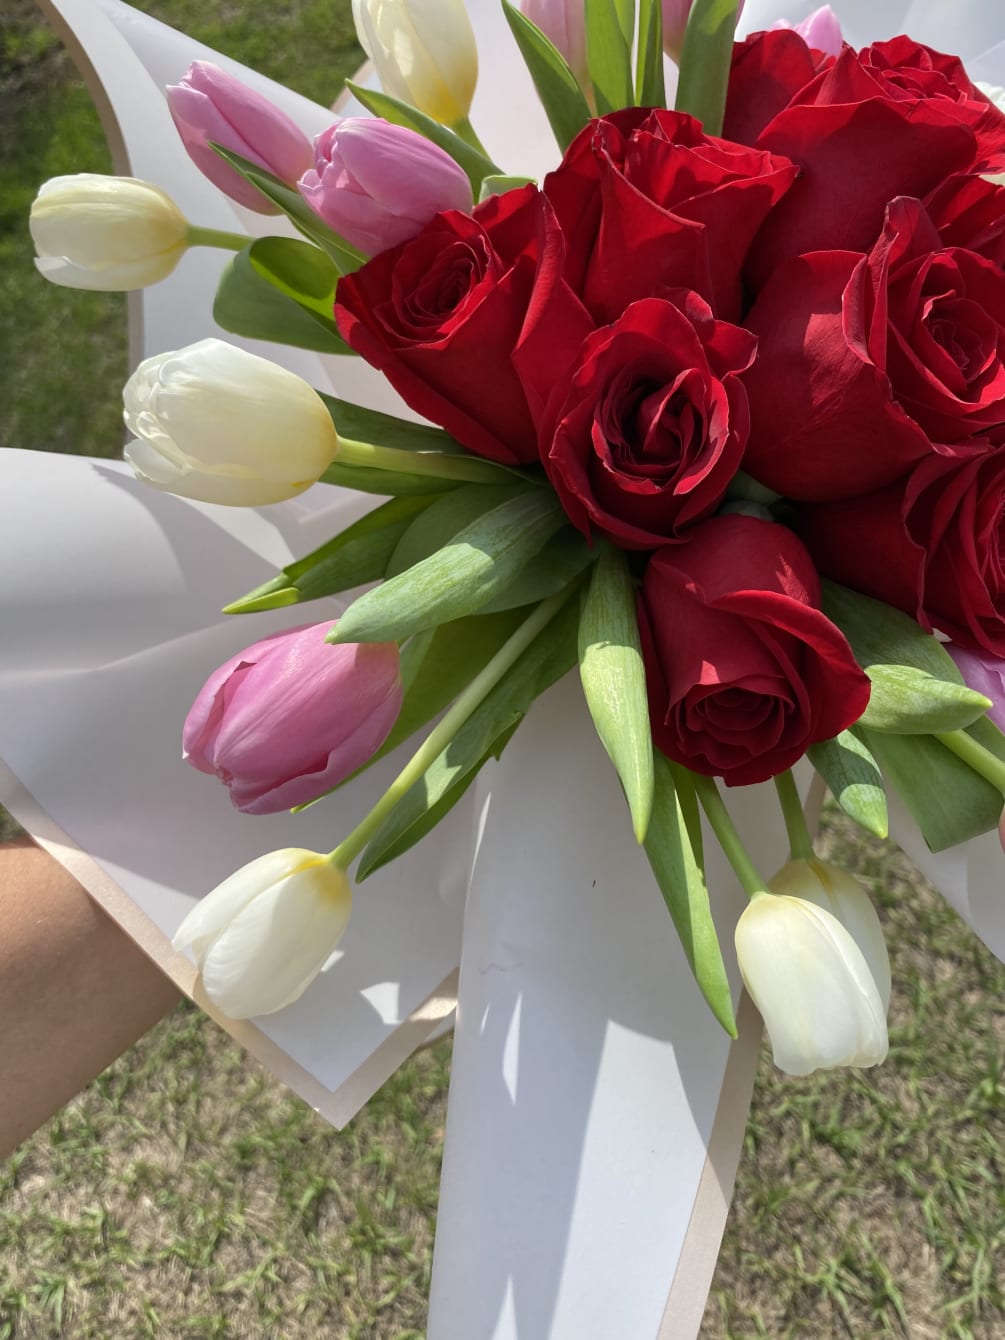 Beautiful dozen red roses with white and pink tulips,wrapped.  Glass vase